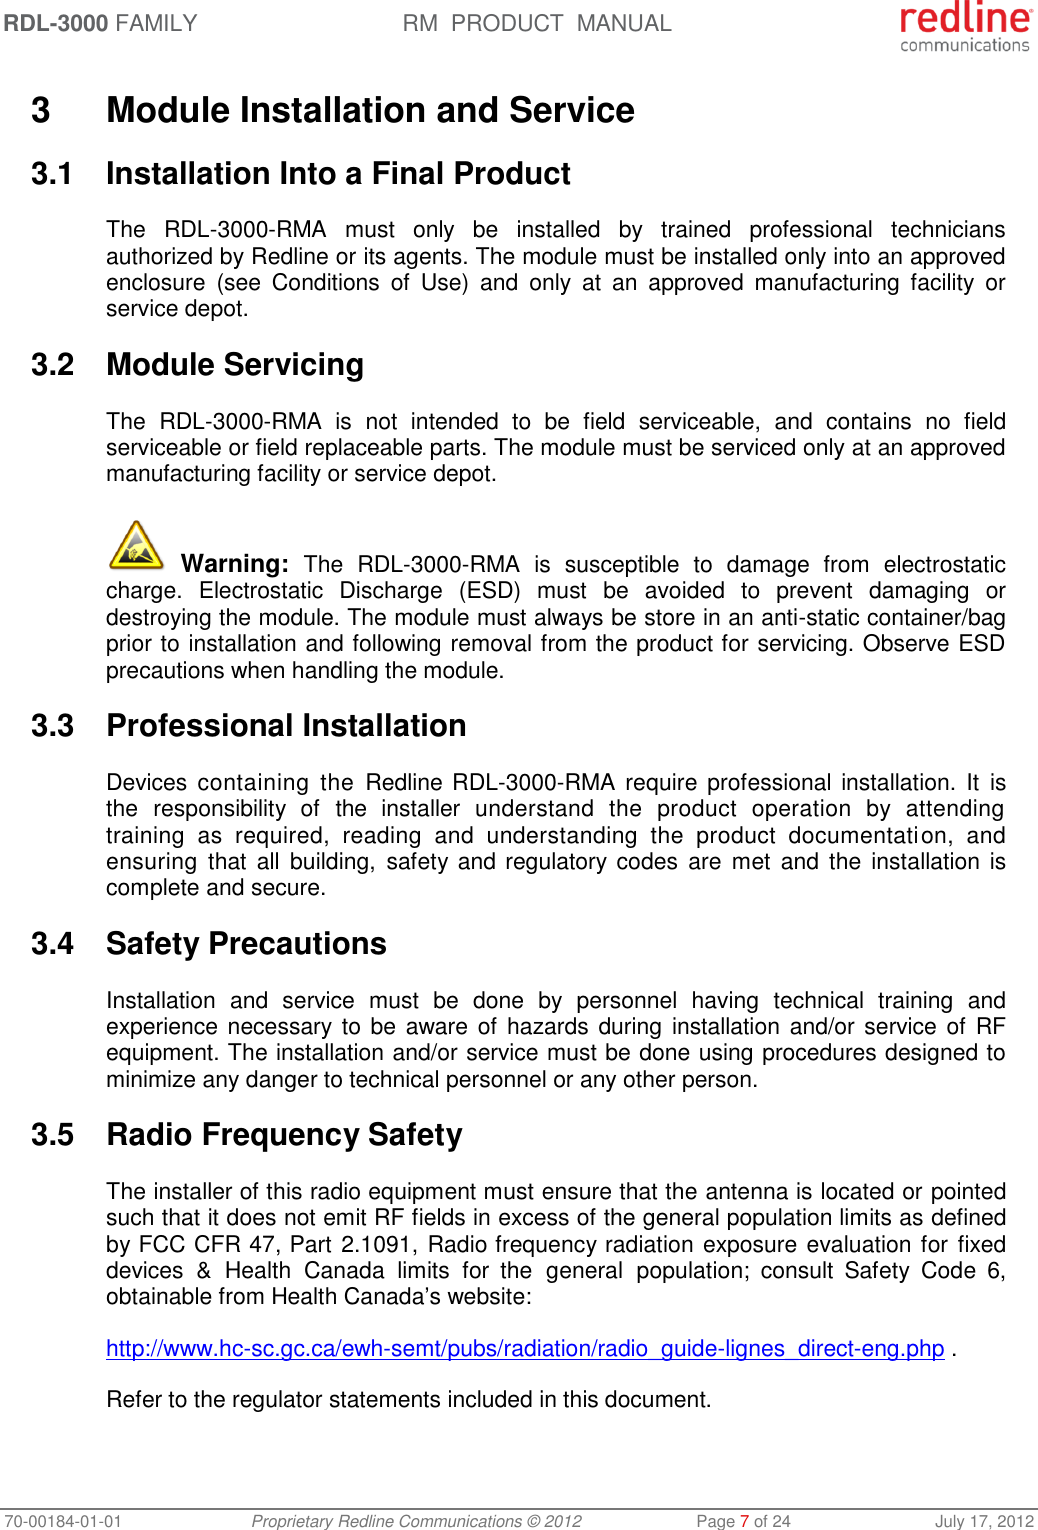 RDL-3000 FAMILY RM  PRODUCT  MANUAL 70-00184-01-01 Proprietary Redline Communications © 2012  Page 7 of 24  July 17, 2012  3  Module Installation and Service 3.1  Installation Into a Final Product The  RDL-3000-RMA  must  only  be  installed  by  trained  professional  technicians authorized by Redline or its agents. The module must be installed only into an approved enclosure  (see  Conditions  of  Use)  and  only  at  an  approved  manufacturing  facility  or service depot. 3.2  Module Servicing The  RDL-3000-RMA  is  not  intended  to  be  field  serviceable,  and  contains  no  field serviceable or field replaceable parts. The module must be serviced only at an approved manufacturing facility or service depot.  Warning:  The  RDL-3000-RMA  is  susceptible  to  damage  from  electrostatic charge.  Electrostatic  Discharge  (ESD)  must  be  avoided  to  prevent  damaging  or destroying the module. The module must always be store in an anti-static container/bag prior to installation and following removal from the product for servicing. Observe ESD precautions when handling the module. 3.3  Professional Installation Devices  containing the  Redline RDL-3000-RMA  require  professional  installation. It  is the  responsibility  of  the  installer  understand  the  product  operation  by  attending training  as  required,  reading  and  understanding  the  product  documentation,  and ensuring  that  all  building, safety and regulatory codes  are  met and the  installation is complete and secure. 3.4  Safety Precautions  Installation  and  service  must  be  done  by  personnel  having  technical  training  and experience necessary to be aware of hazards during installation and/or service of  RF equipment. The installation and/or service must be done using procedures designed to minimize any danger to technical personnel or any other person.  3.5  Radio Frequency Safety The installer of this radio equipment must ensure that the antenna is located or pointed such that it does not emit RF fields in excess of the general population limits as defined by FCC CFR 47, Part 2.1091, Radio frequency radiation exposure evaluation for  fixed devices  &amp;  Health Canada  limits  for  the  general  population;  consult  Safety  Code  6, obtainable from Health Canada’s website: http://www.hc-sc.gc.ca/ewh-semt/pubs/radiation/radio_guide-lignes_direct-eng.php . Refer to the regulator statements included in this document. 